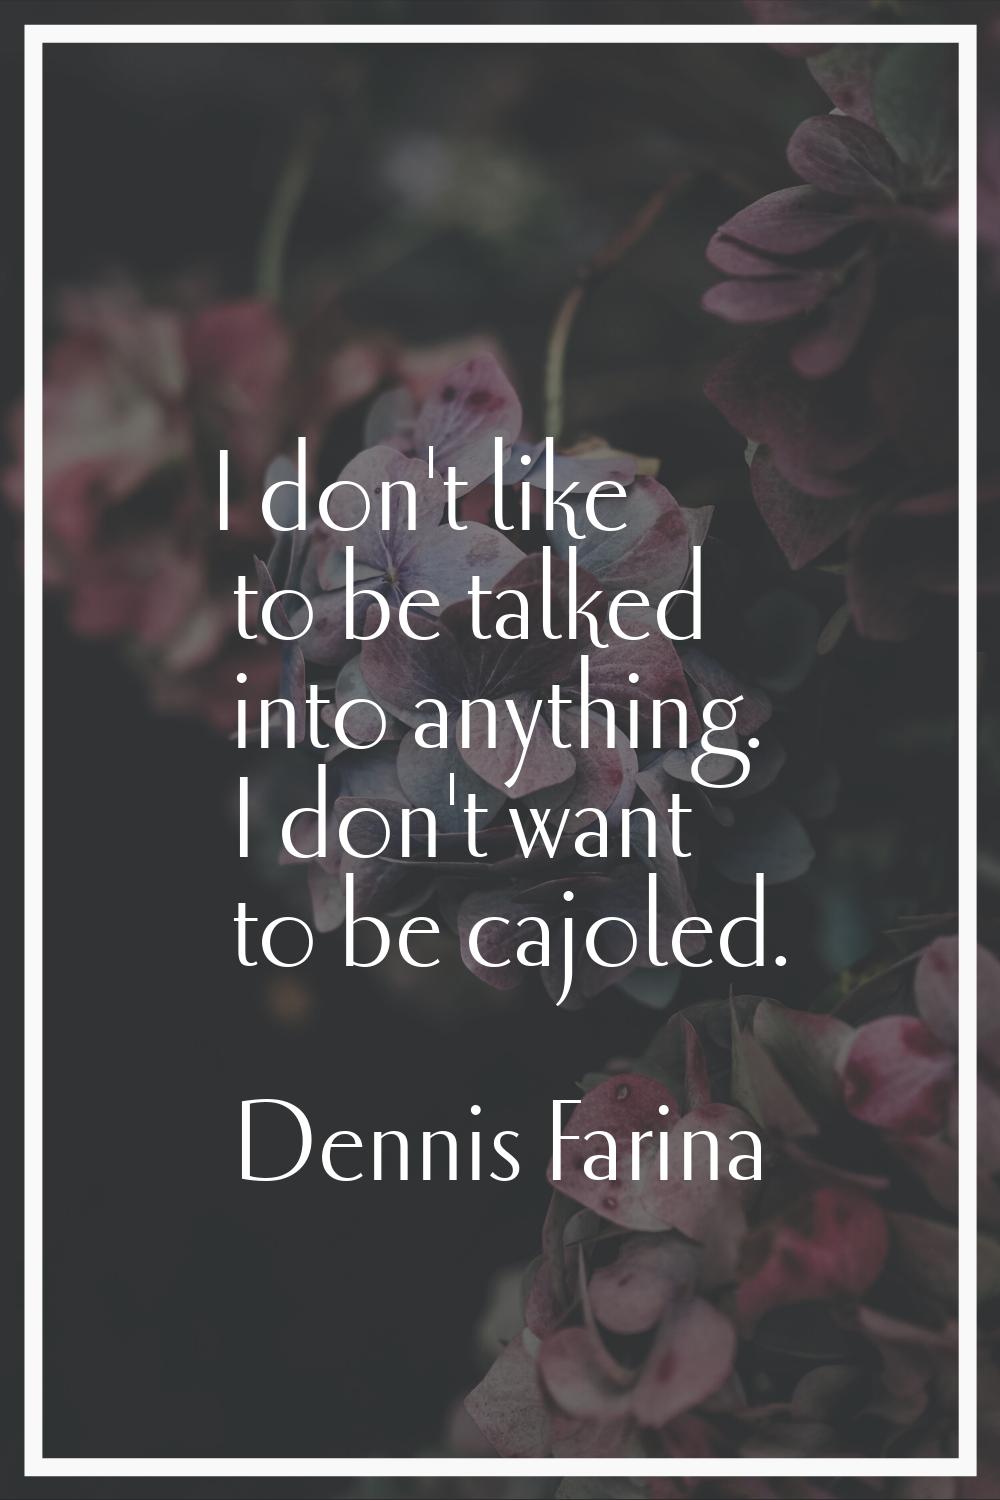 I don't like to be talked into anything. I don't want to be cajoled.